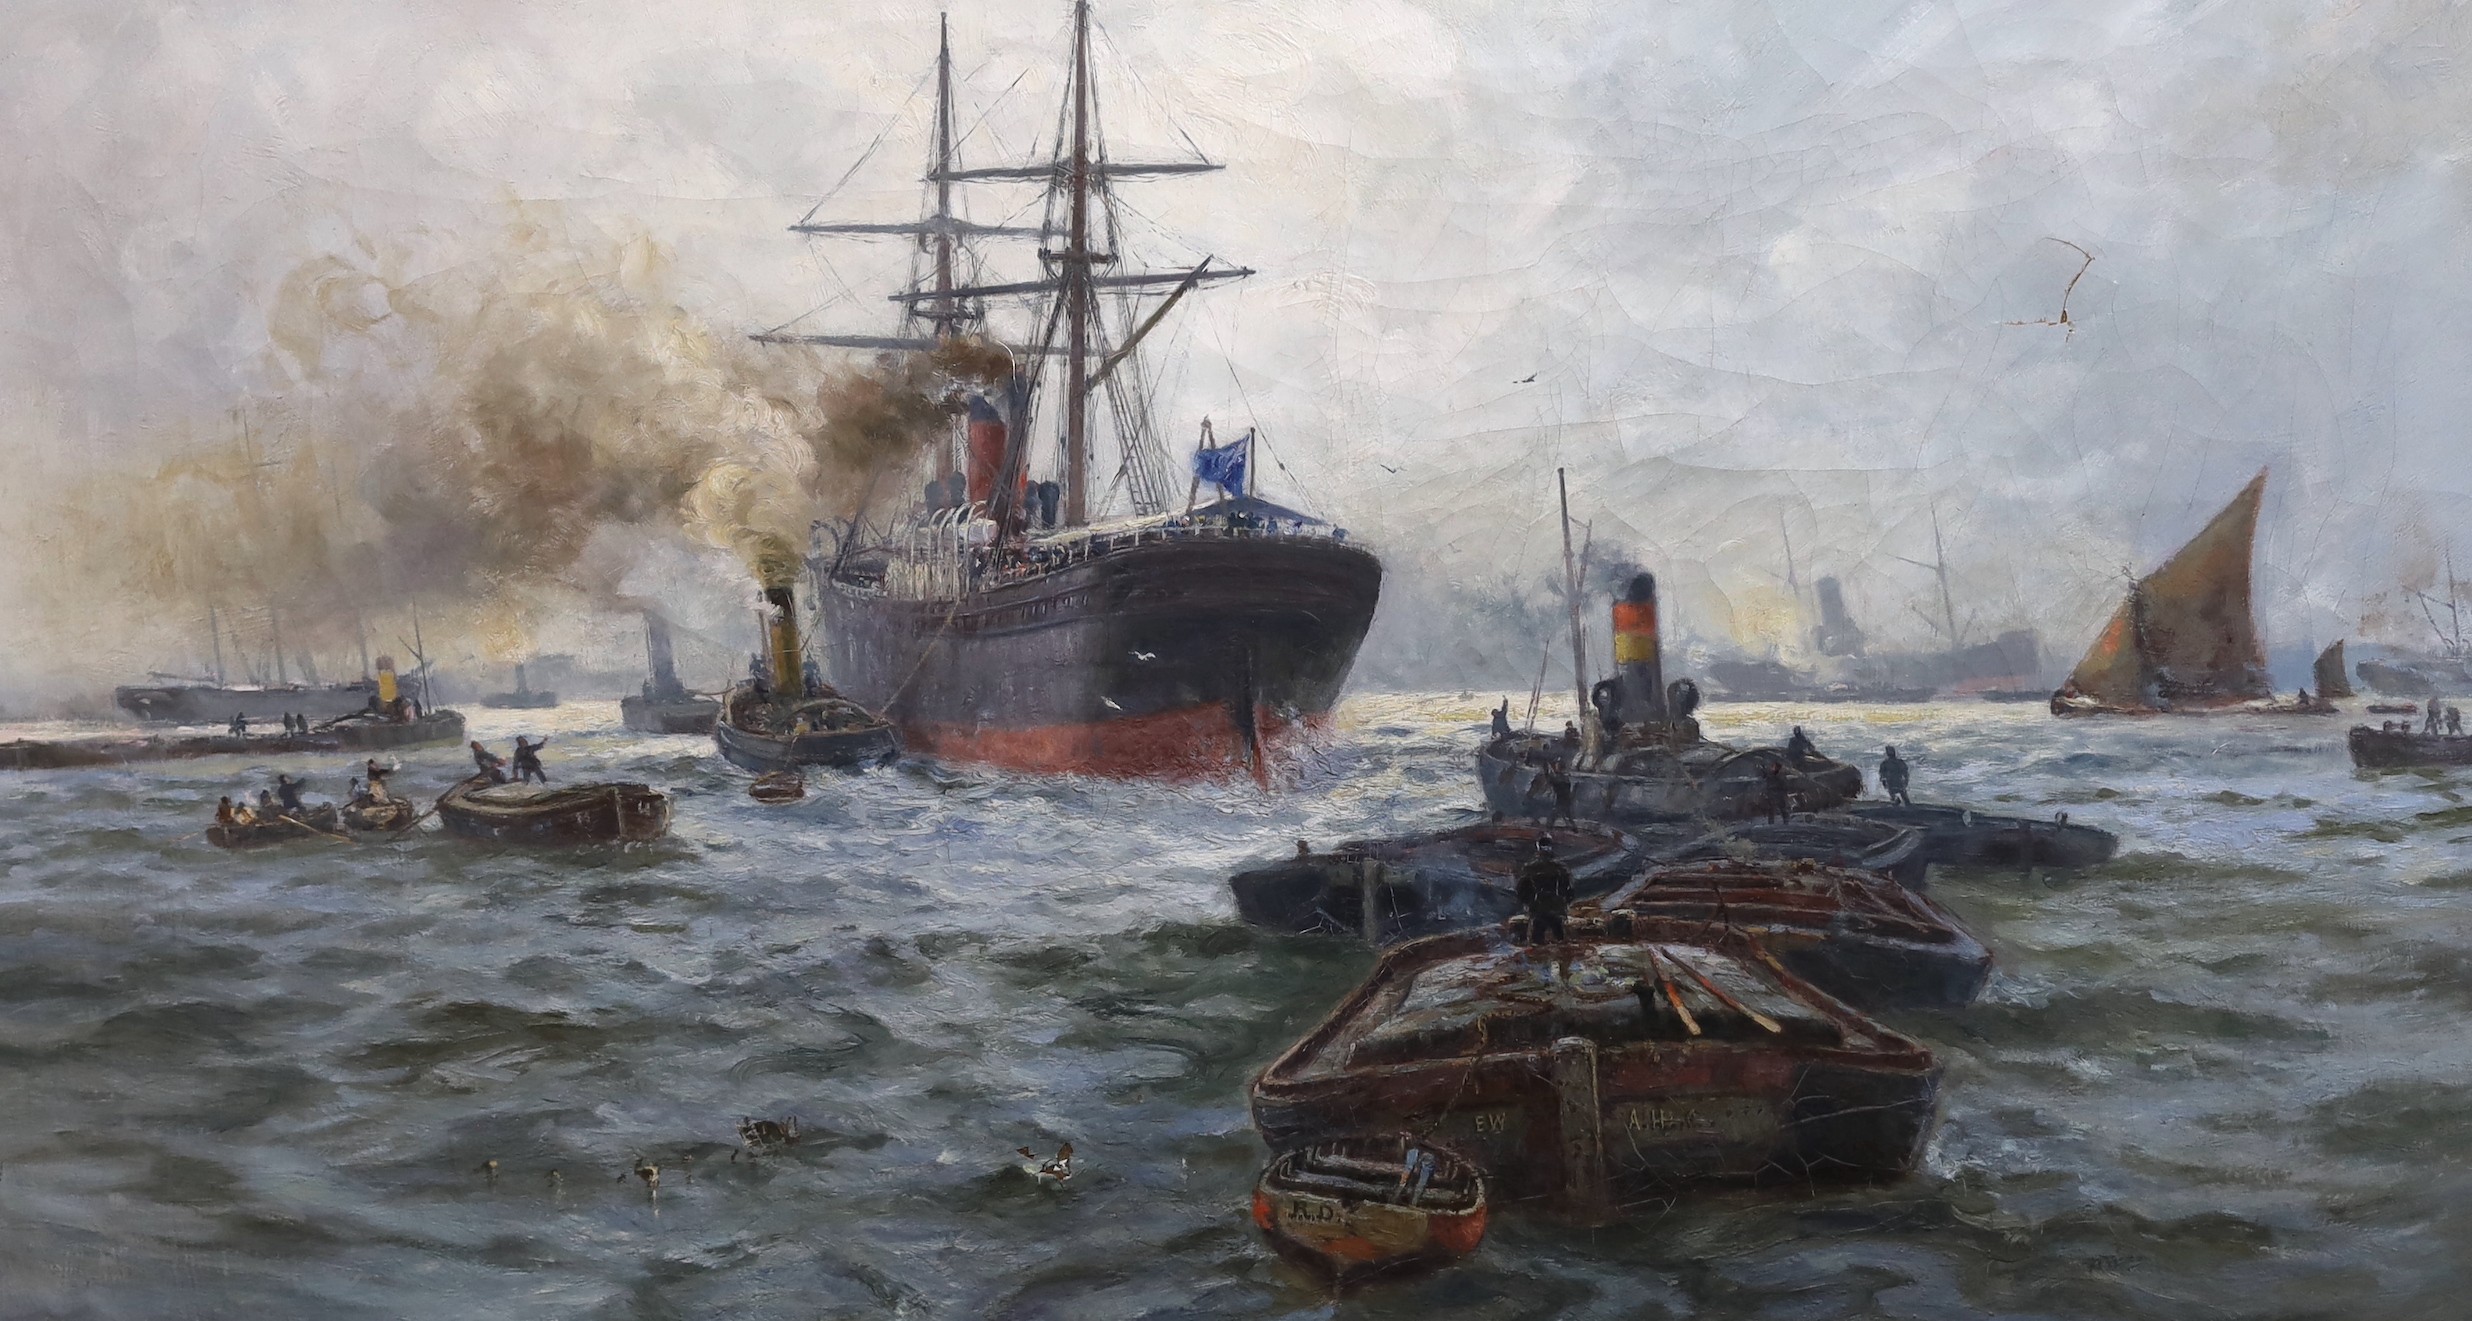 Charles John de Lacy (British, 1856-1936), 'Off to the Cape - A Donald Curree Steamer going down Blackwall Reach', oil on canvas, 60 x 106cm